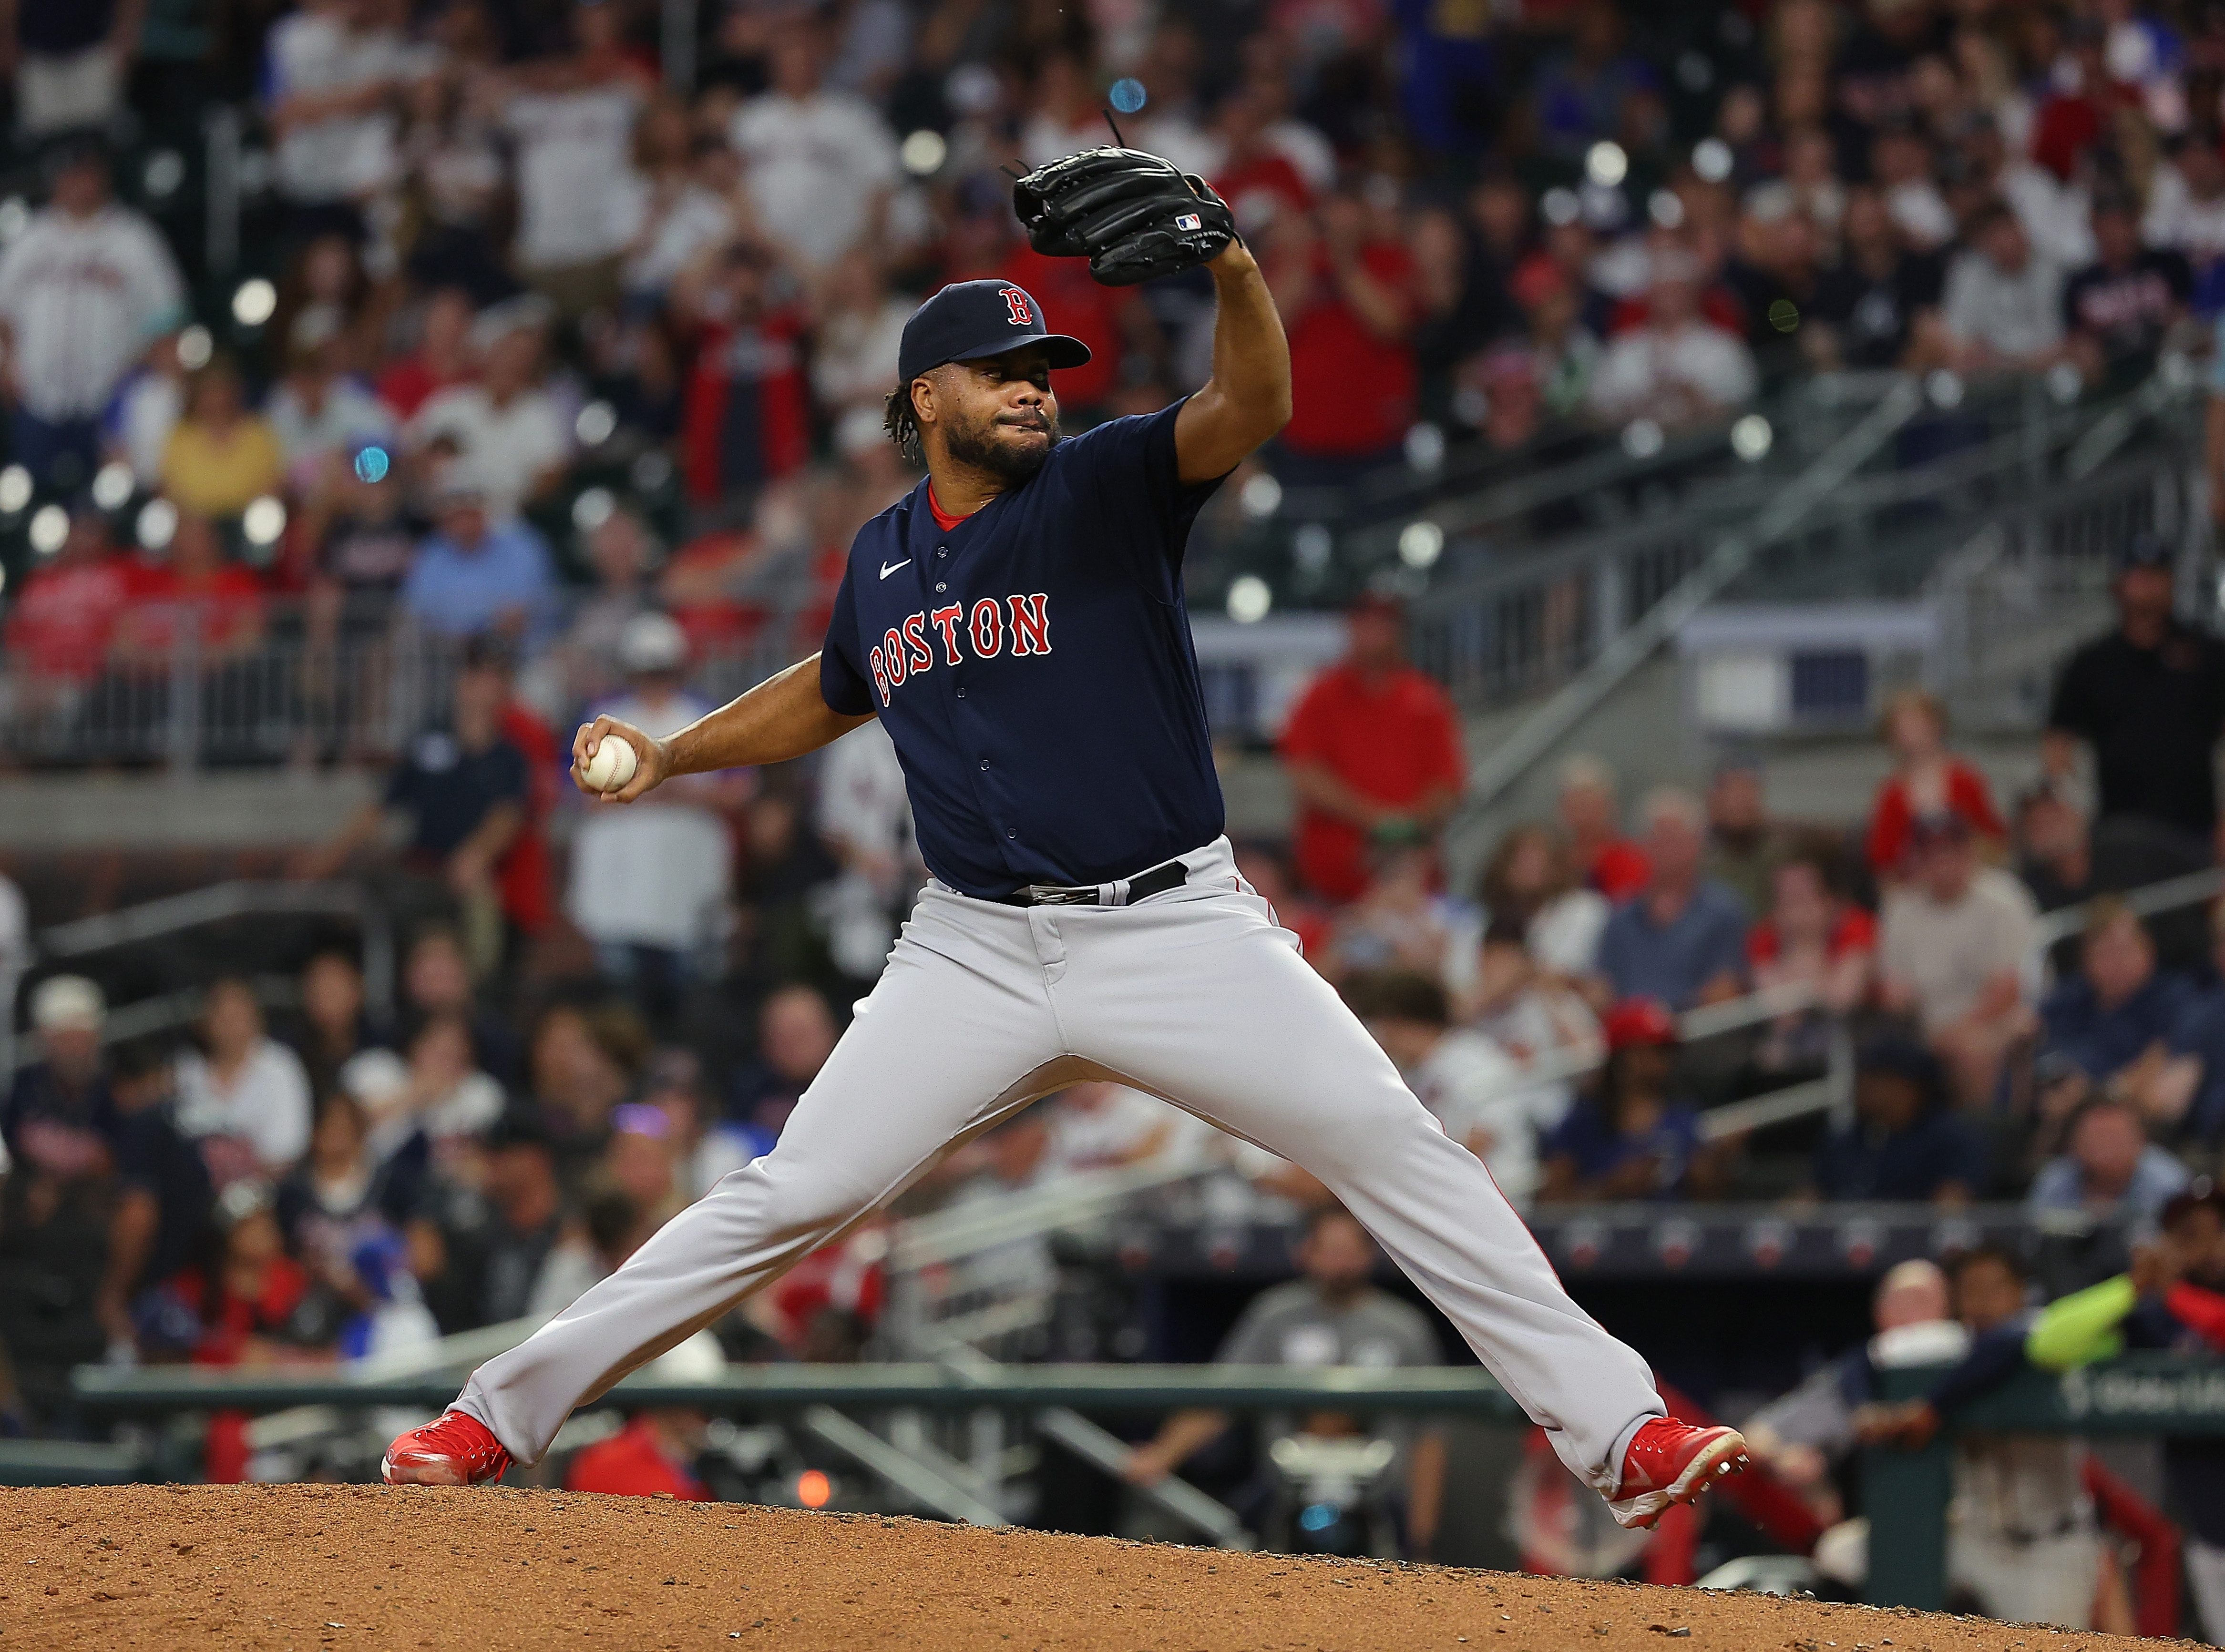 Kenley Jansen represents Red Sox in All-Star Game